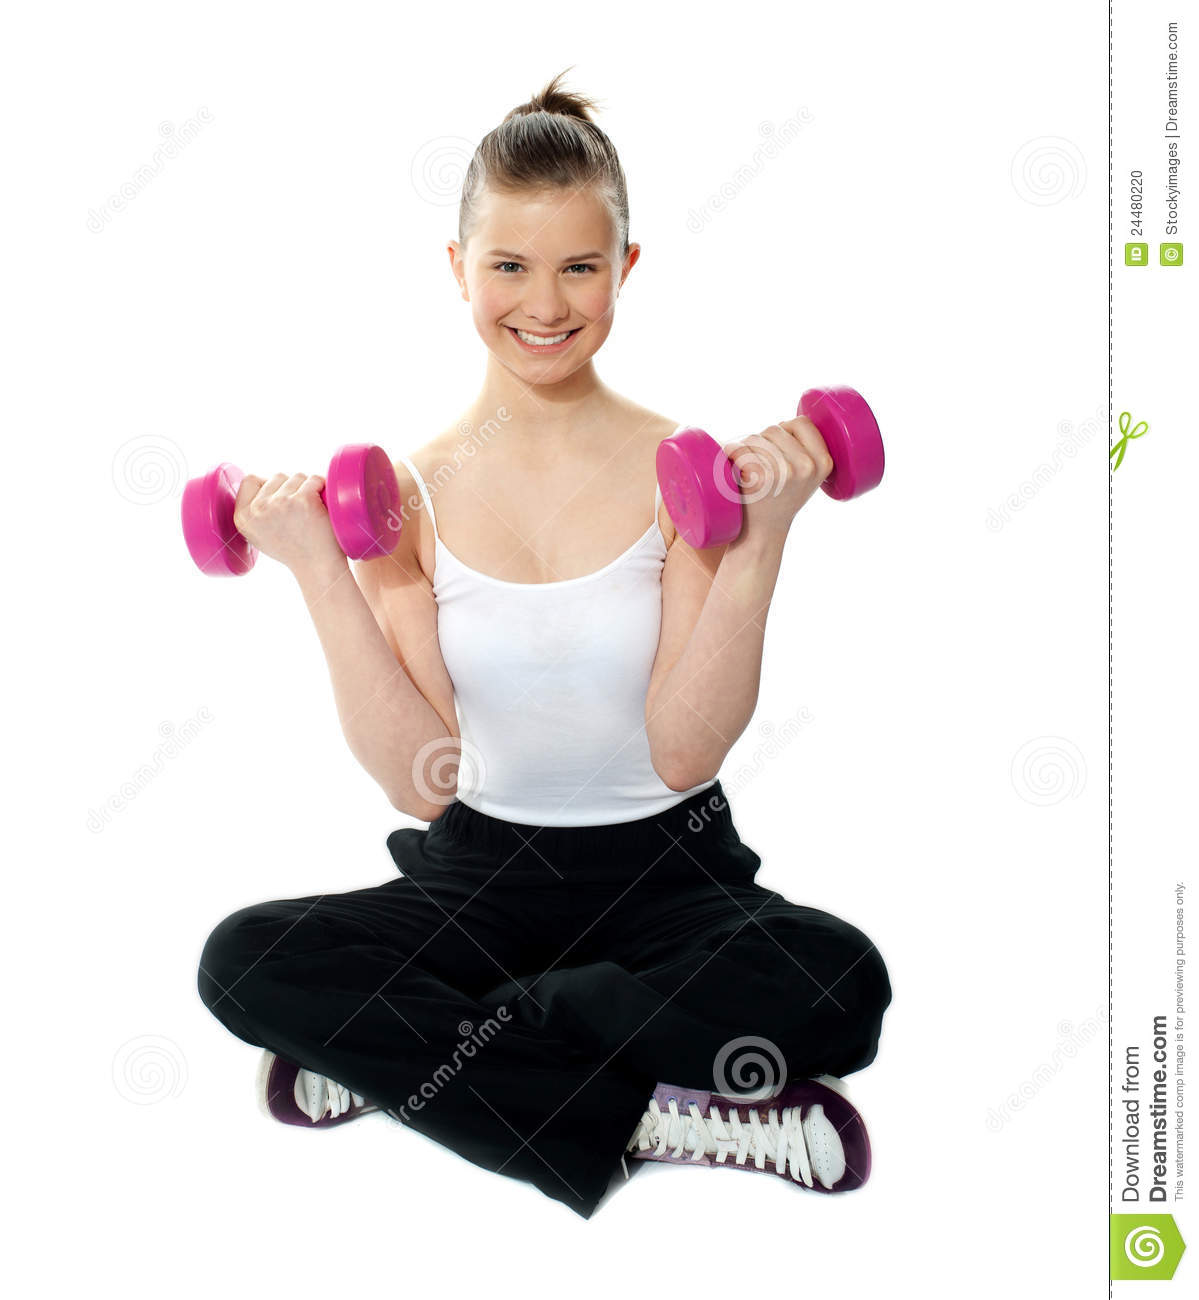 Young Girl Lifting Weights Stock Photo   Image  24480220